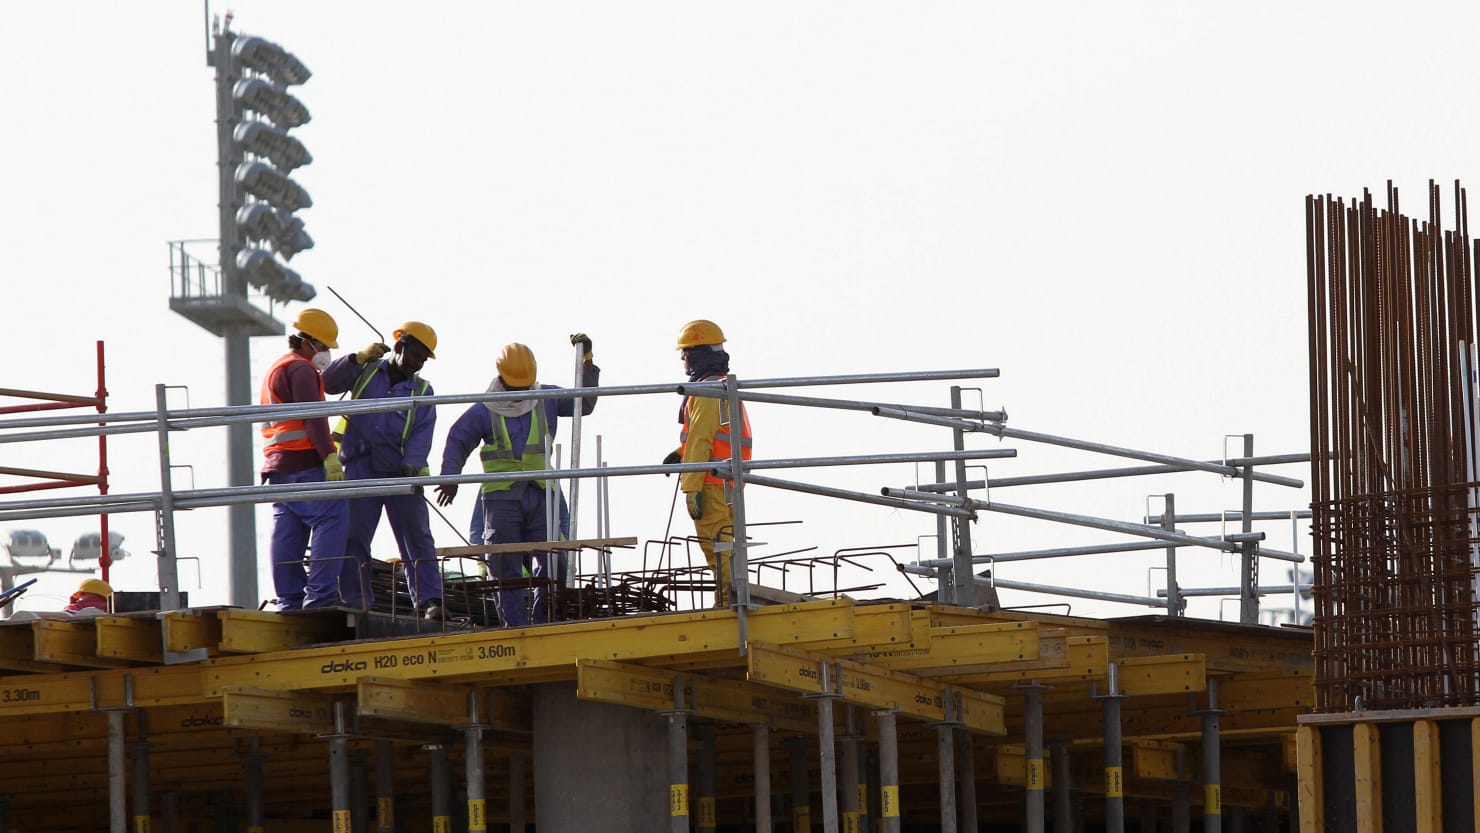 6,500 migrant workers were sacrificed for Qatar’s World Cup dream, says report